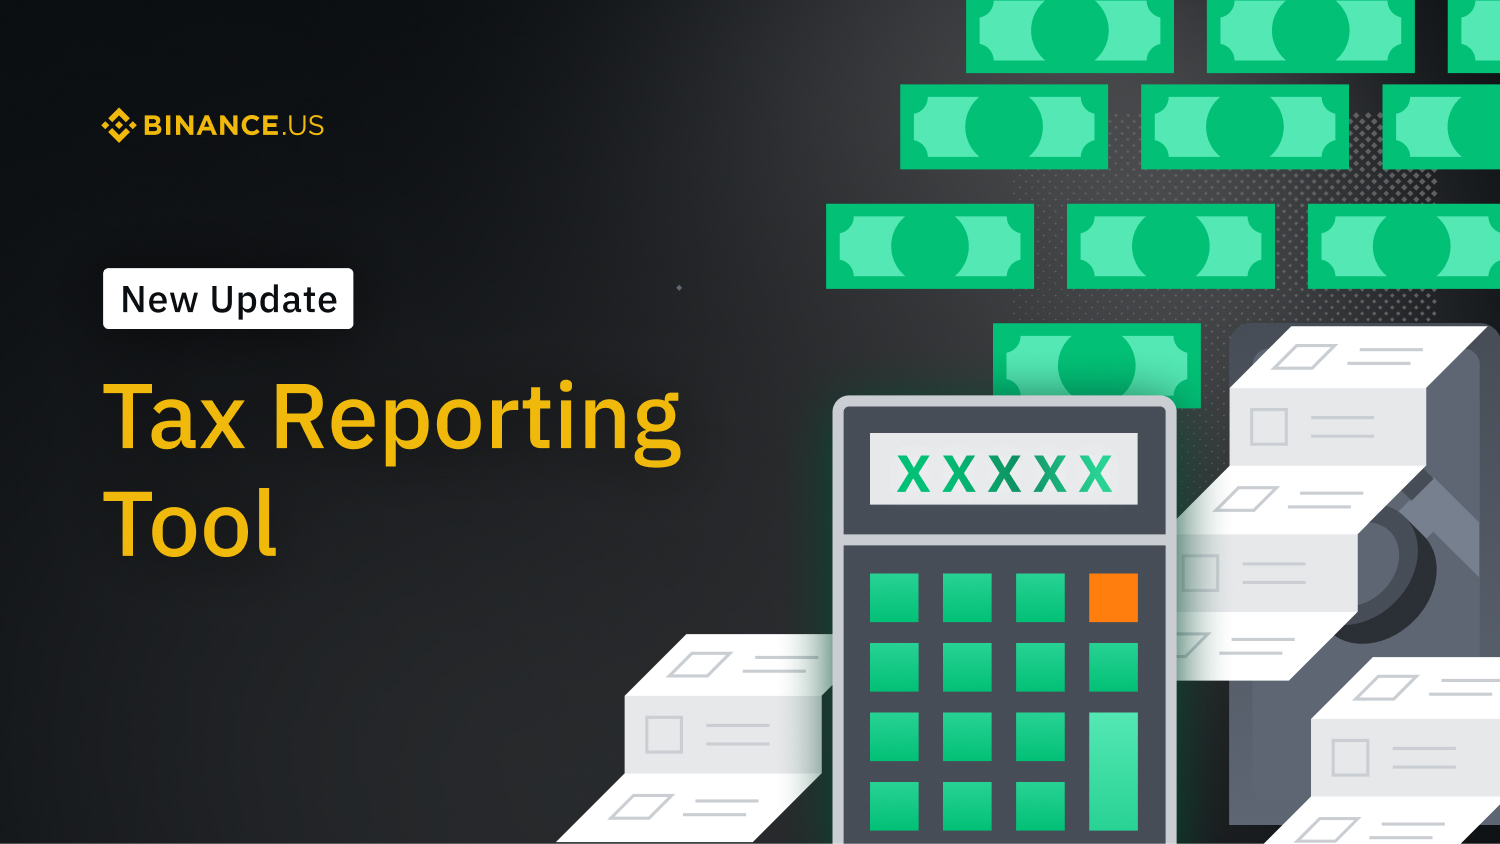 Binance.US Introduces Updated Tax Reporting Tool to Help Users File Taxes